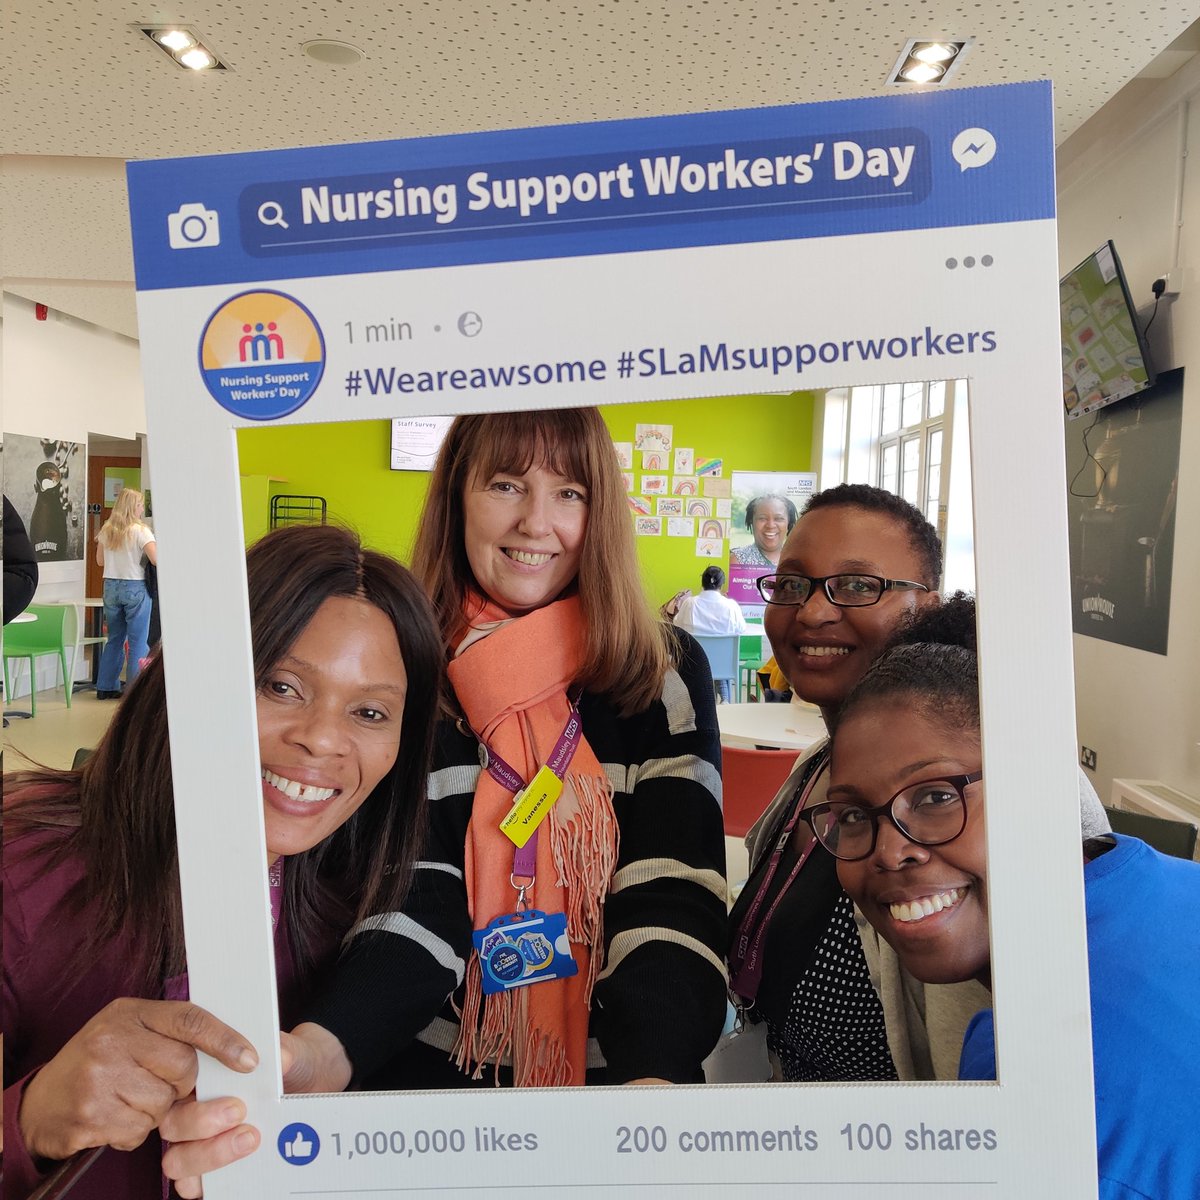 Celebrating #NursingSupportWorkersDay with our amazing staff at South London and Maudsley NHS Foundation Trust @MaudsleyNHS